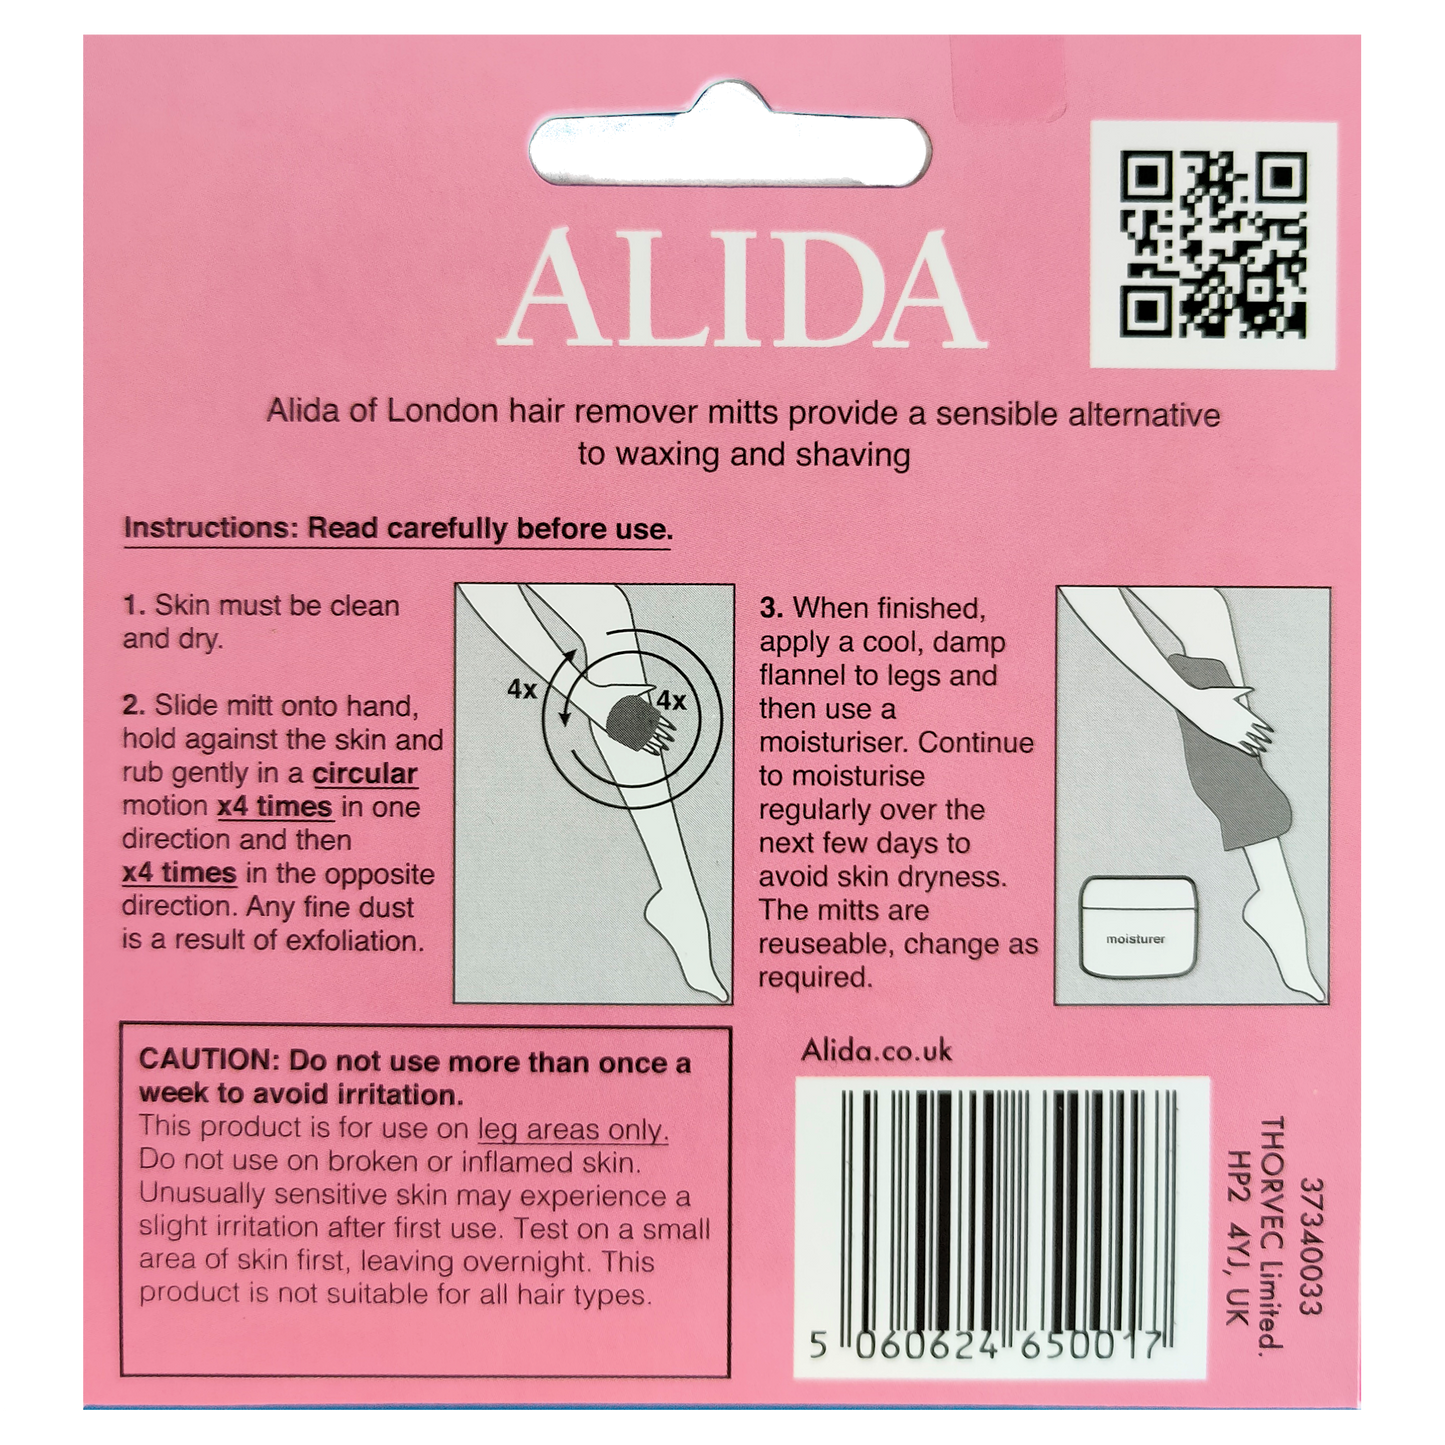 Alida Hair Remover Mitt for smooth hair-free legs from Alida.co.uk. Instructions for bst results